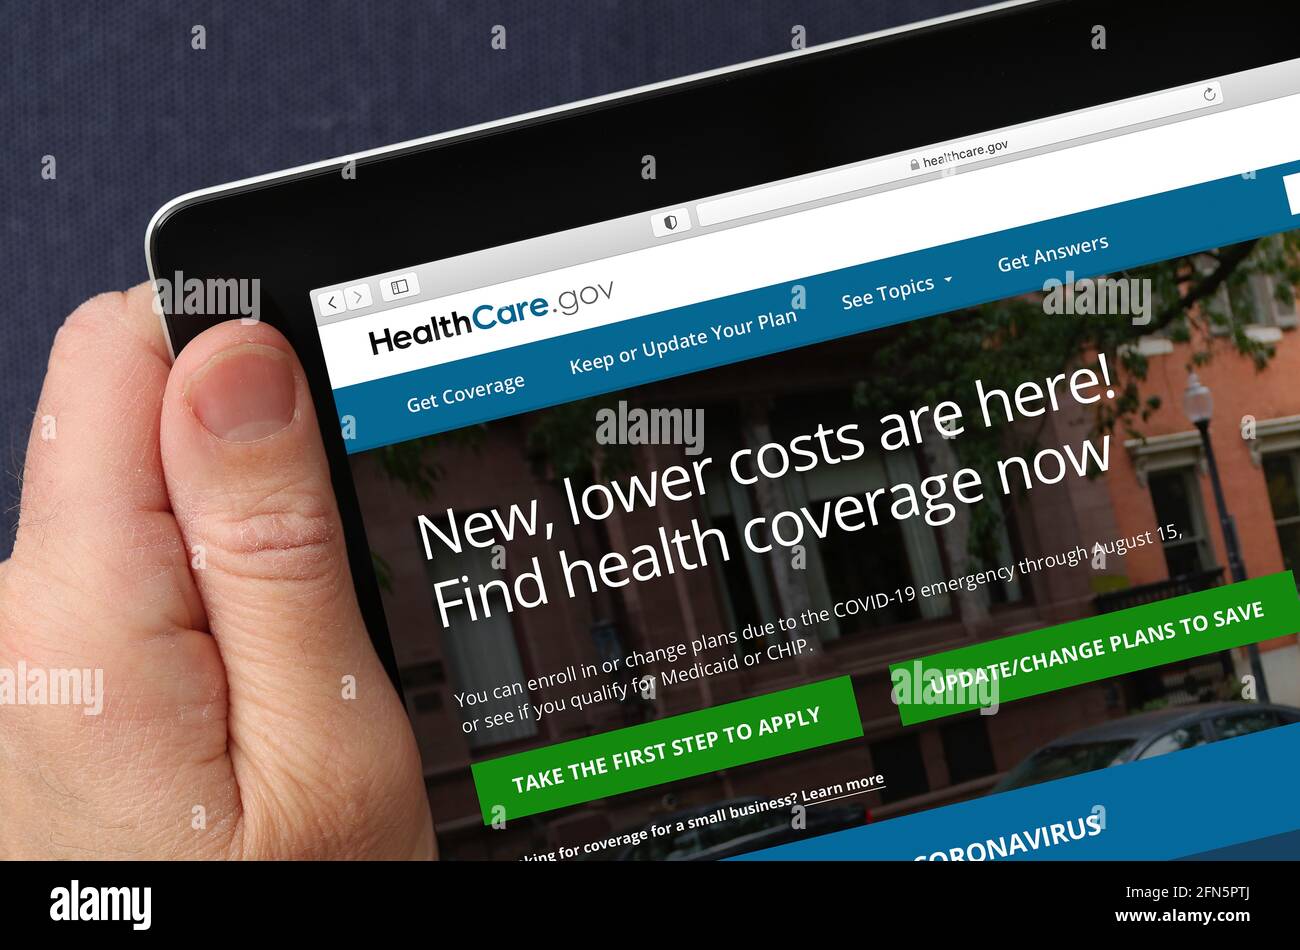 Healthcare.gov Affordable Care Act website viewed on an iPad  (editorial use only) Stock Photo